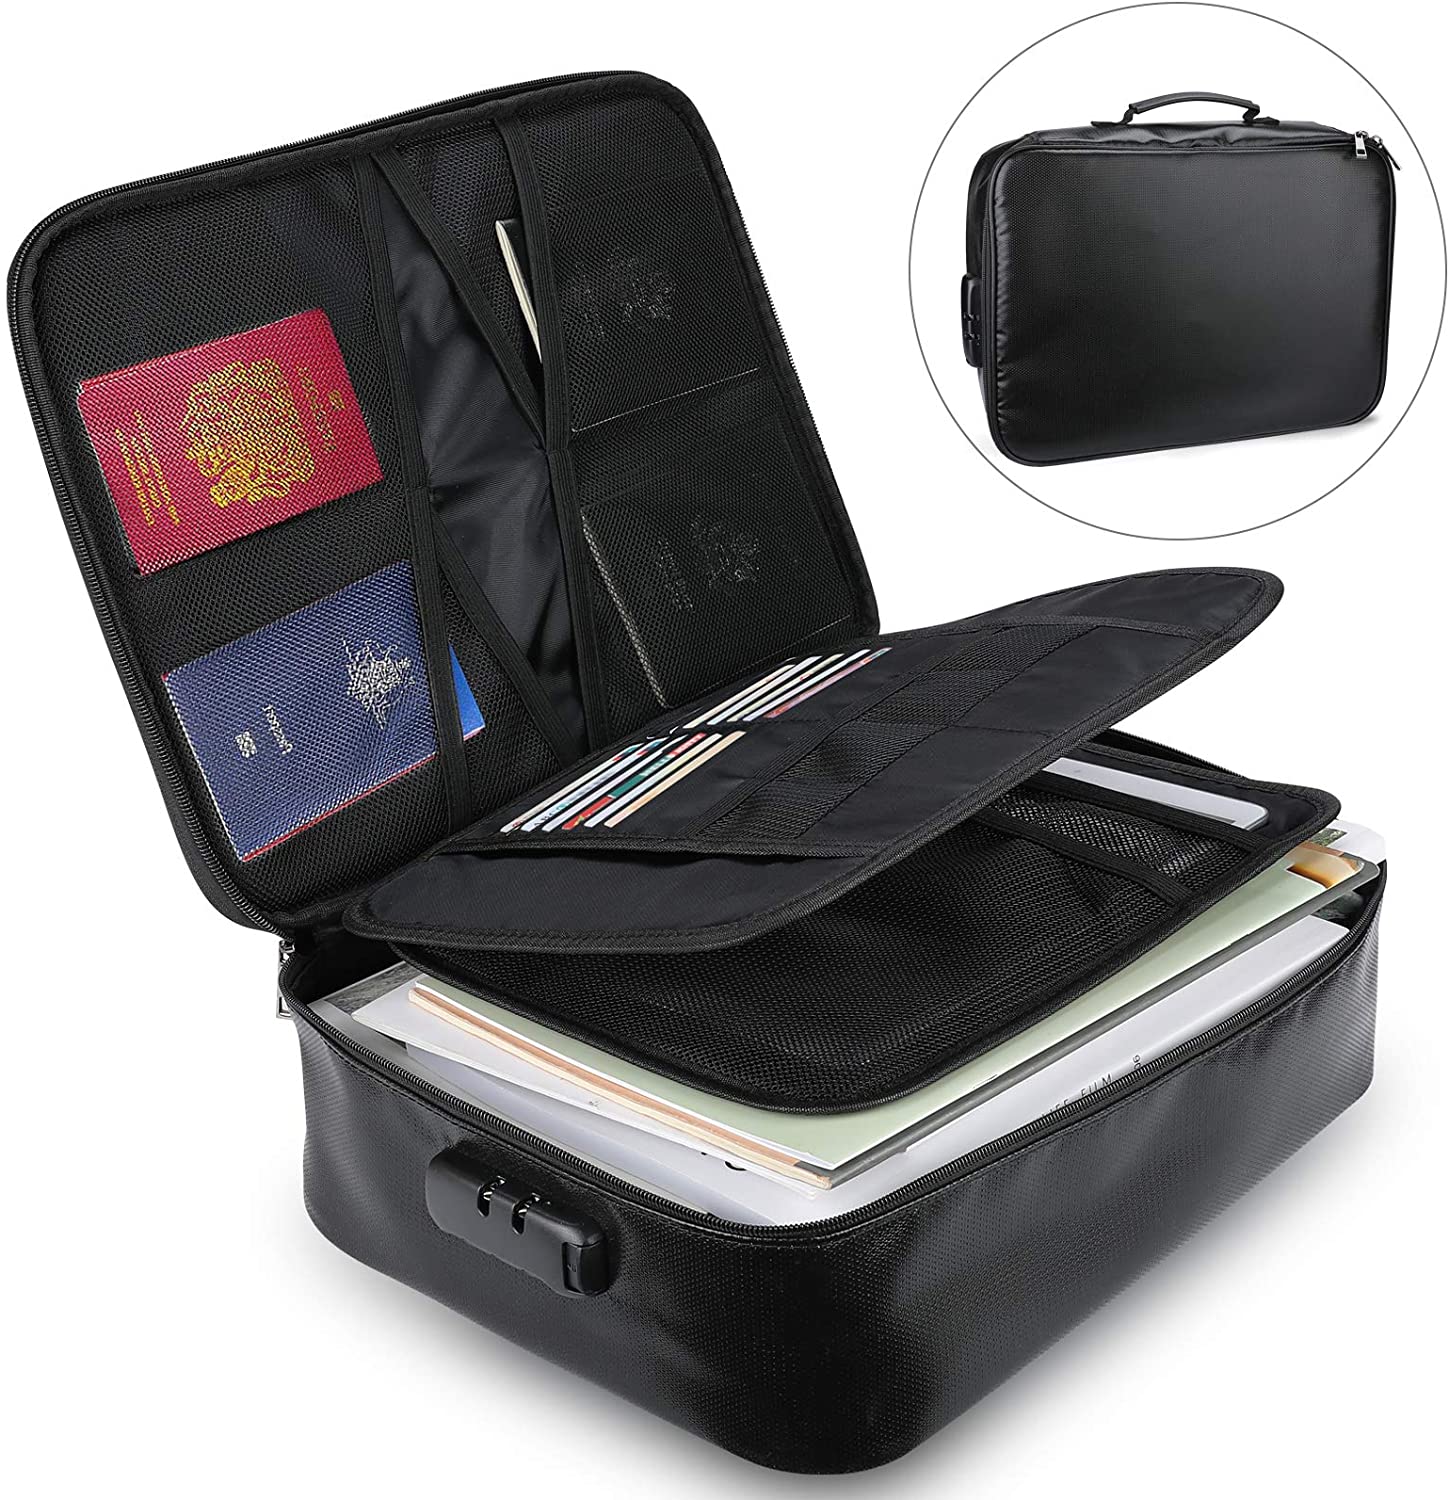 Fdit Fireproof Document BagsTwo Layers Fire Safe Bag and Waterproof Storage Waterproof and Fireproof Bag for Documents iPad Money Jewelry and Money 